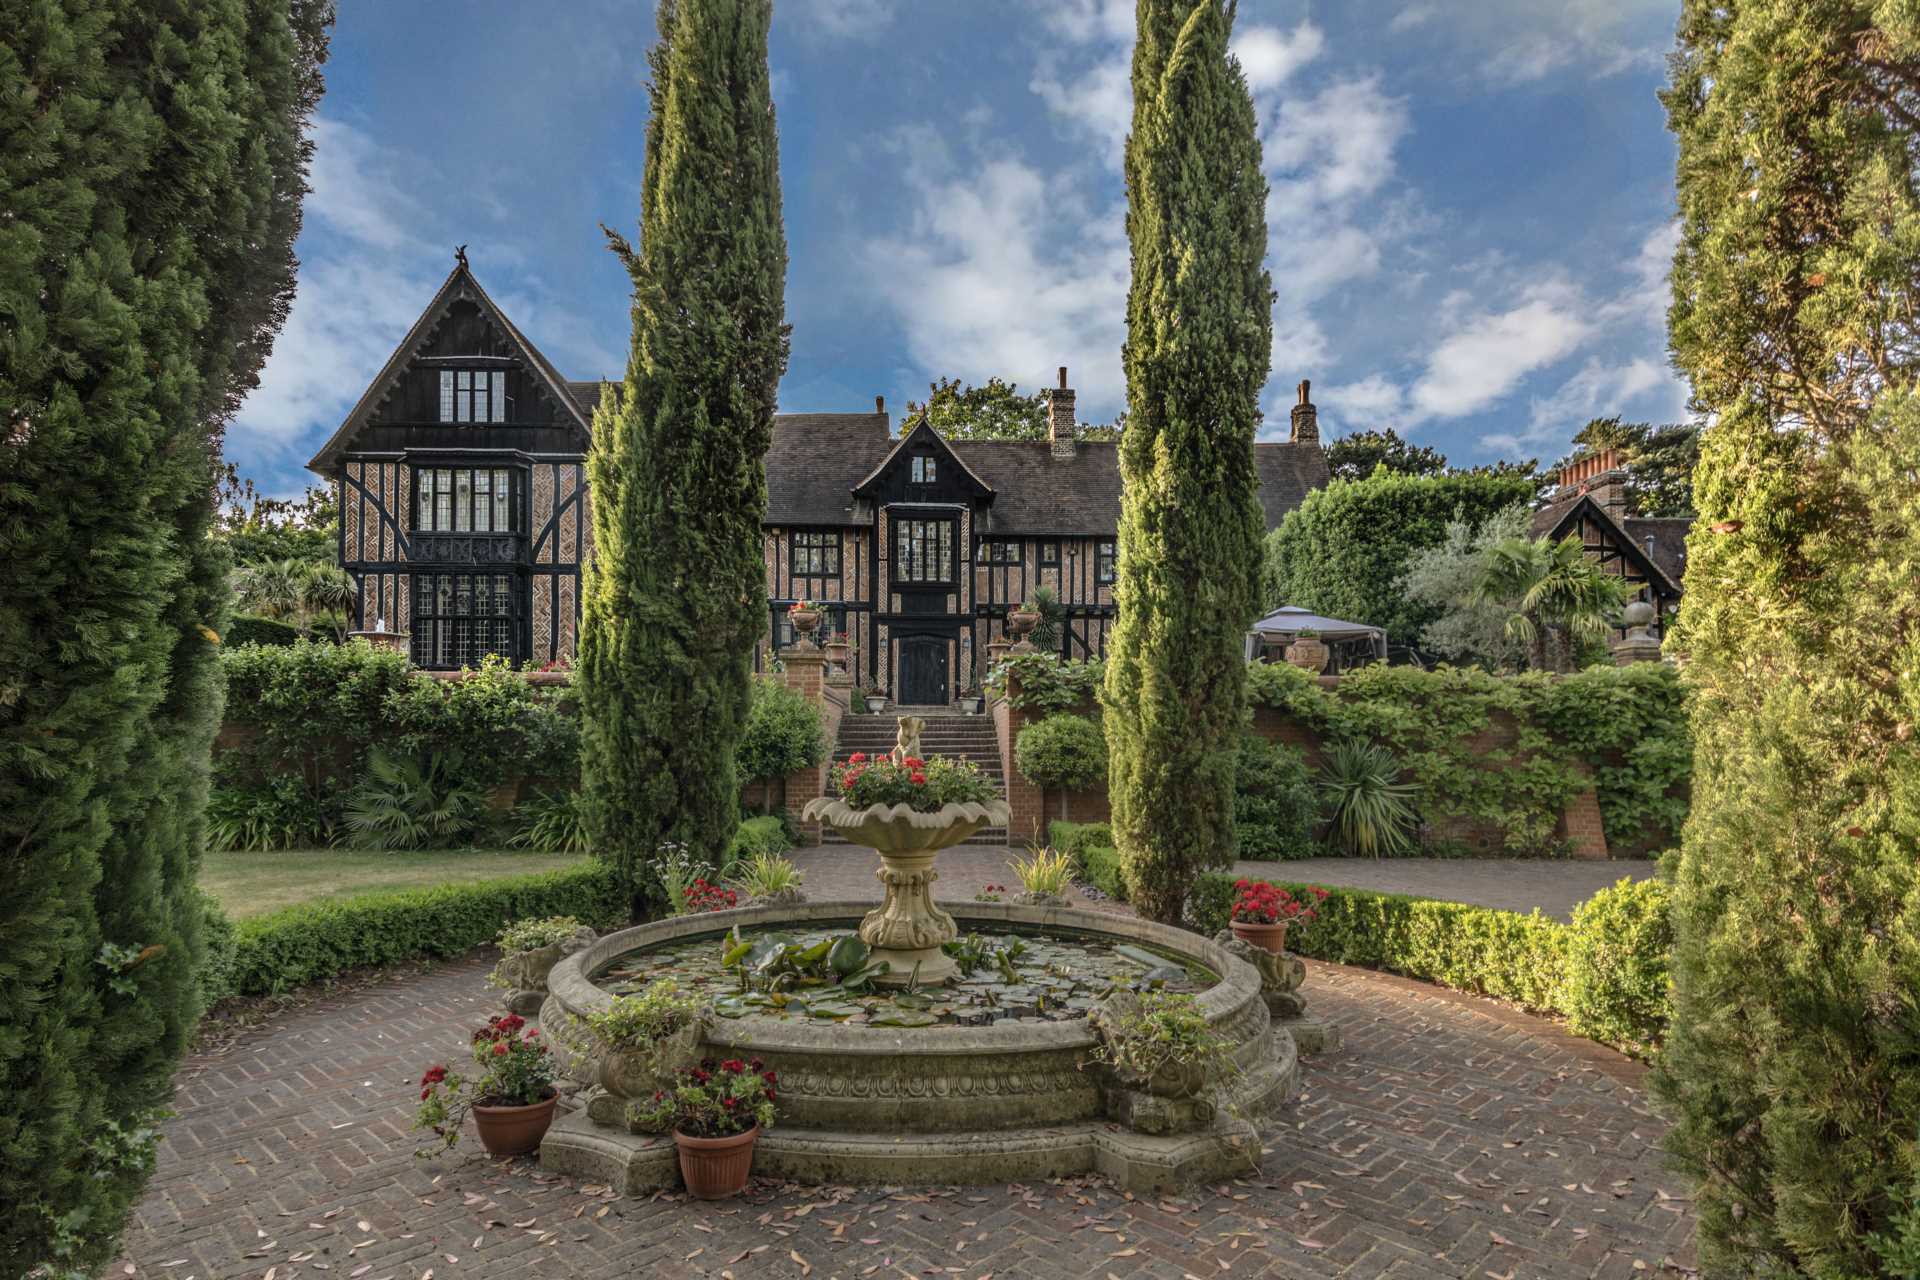 The Tudor mobile mansion that was moved 90 miles goes on sale for £12,950,000